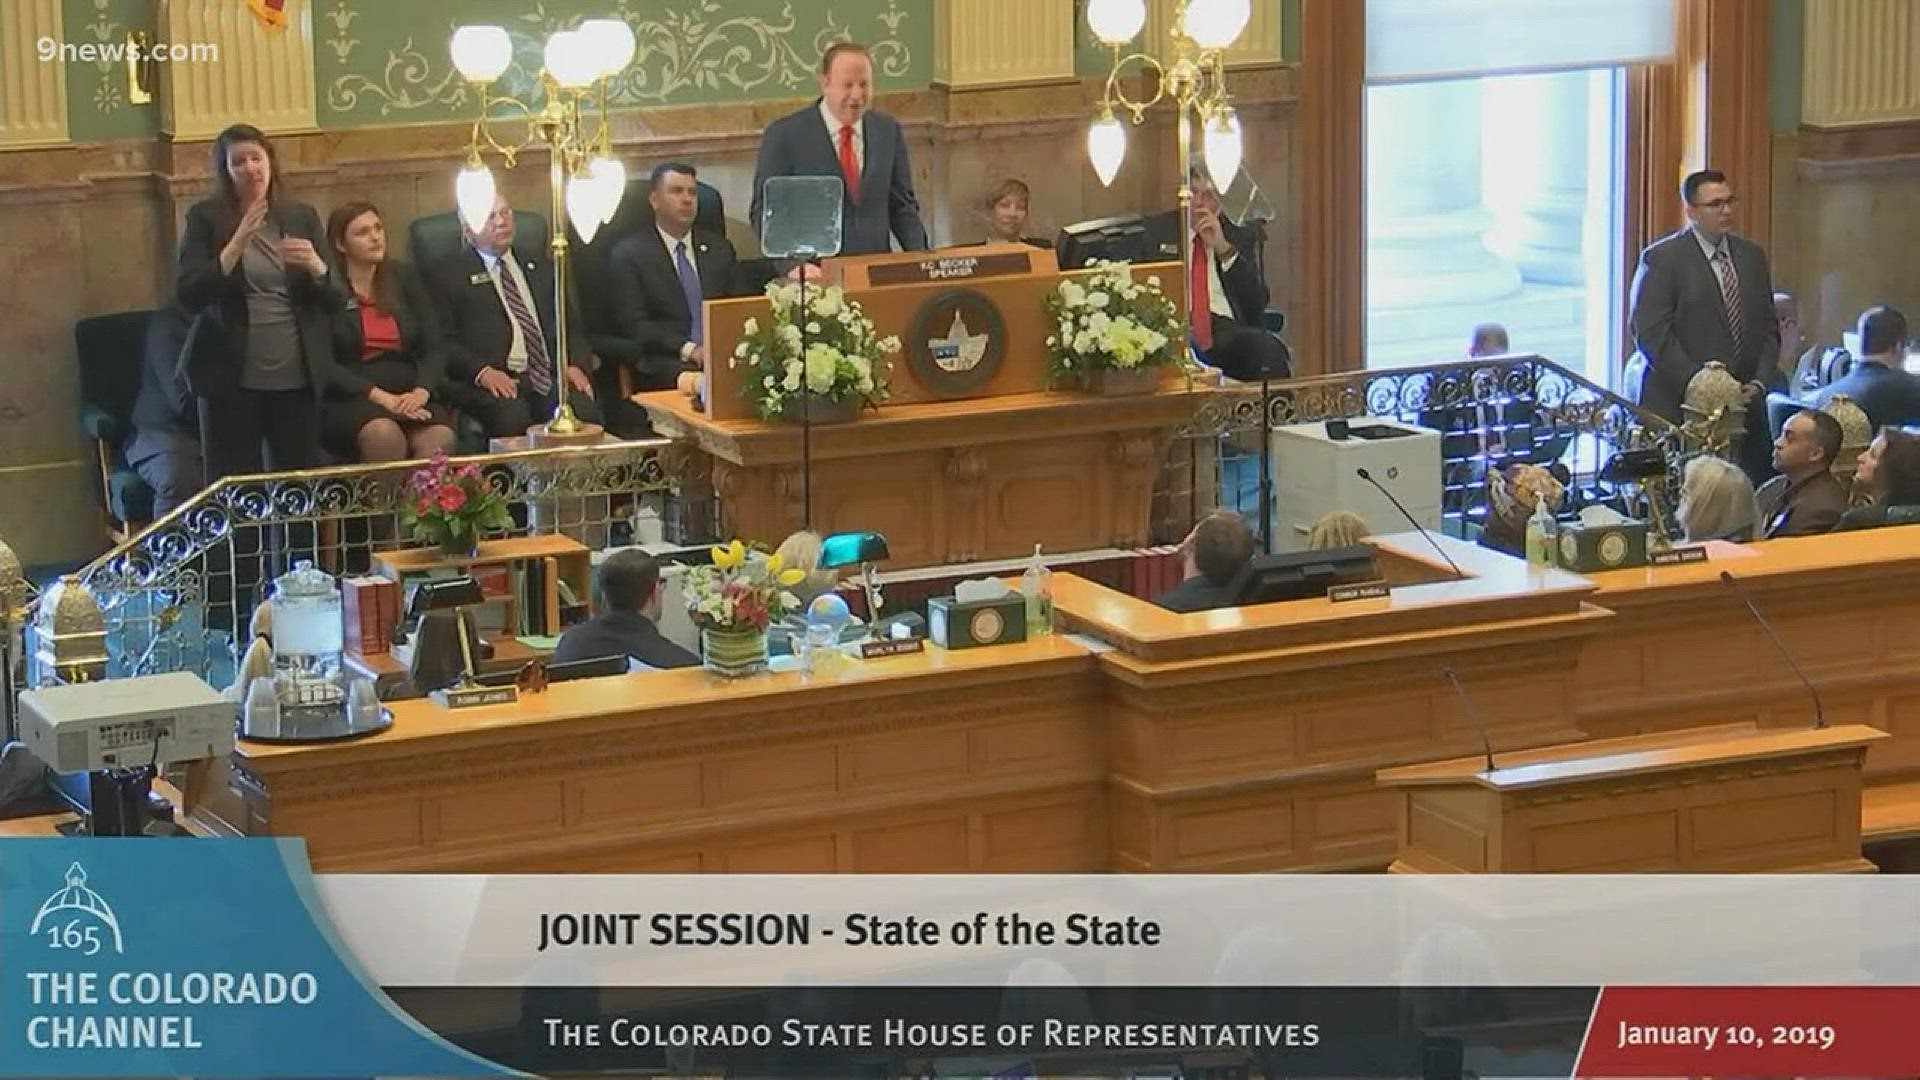 Two days after his inauguration, Gov. Jared Polis (D-Colorado) laid out his vision for the future of the Centennial State during his first State of the State Thursday morning. It was a vision that included free full-day kindergarten and preschool, the implementation of an “Office of Saving People Money on Health Care” and lowering the income tax rate.